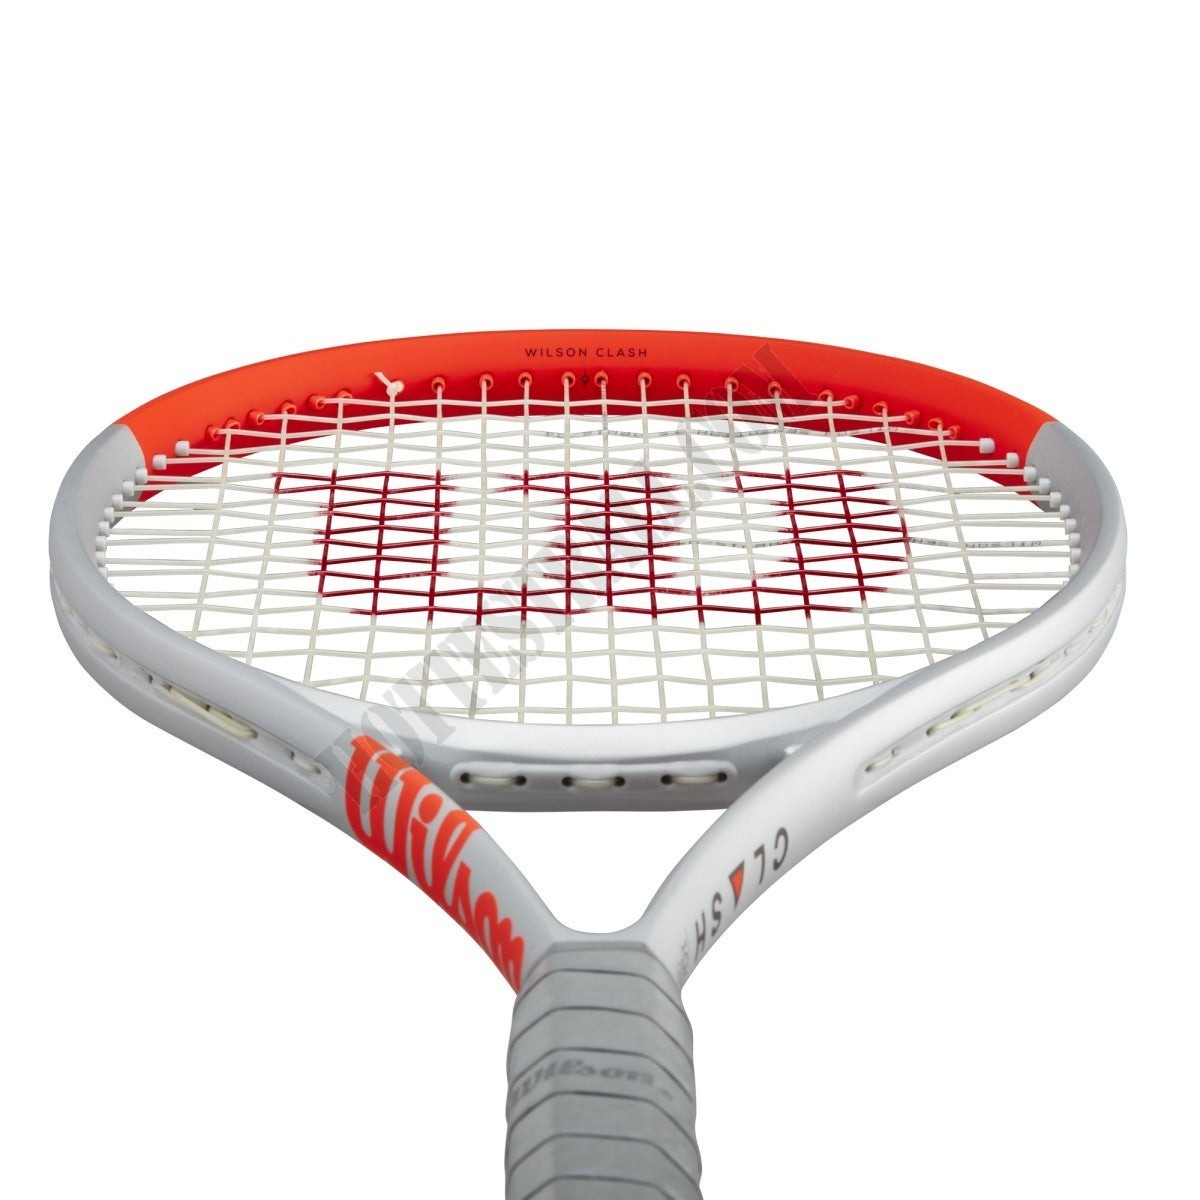 Clash 100 Pro Special Edition Tennis Racket - Wilson Discount Store - -3